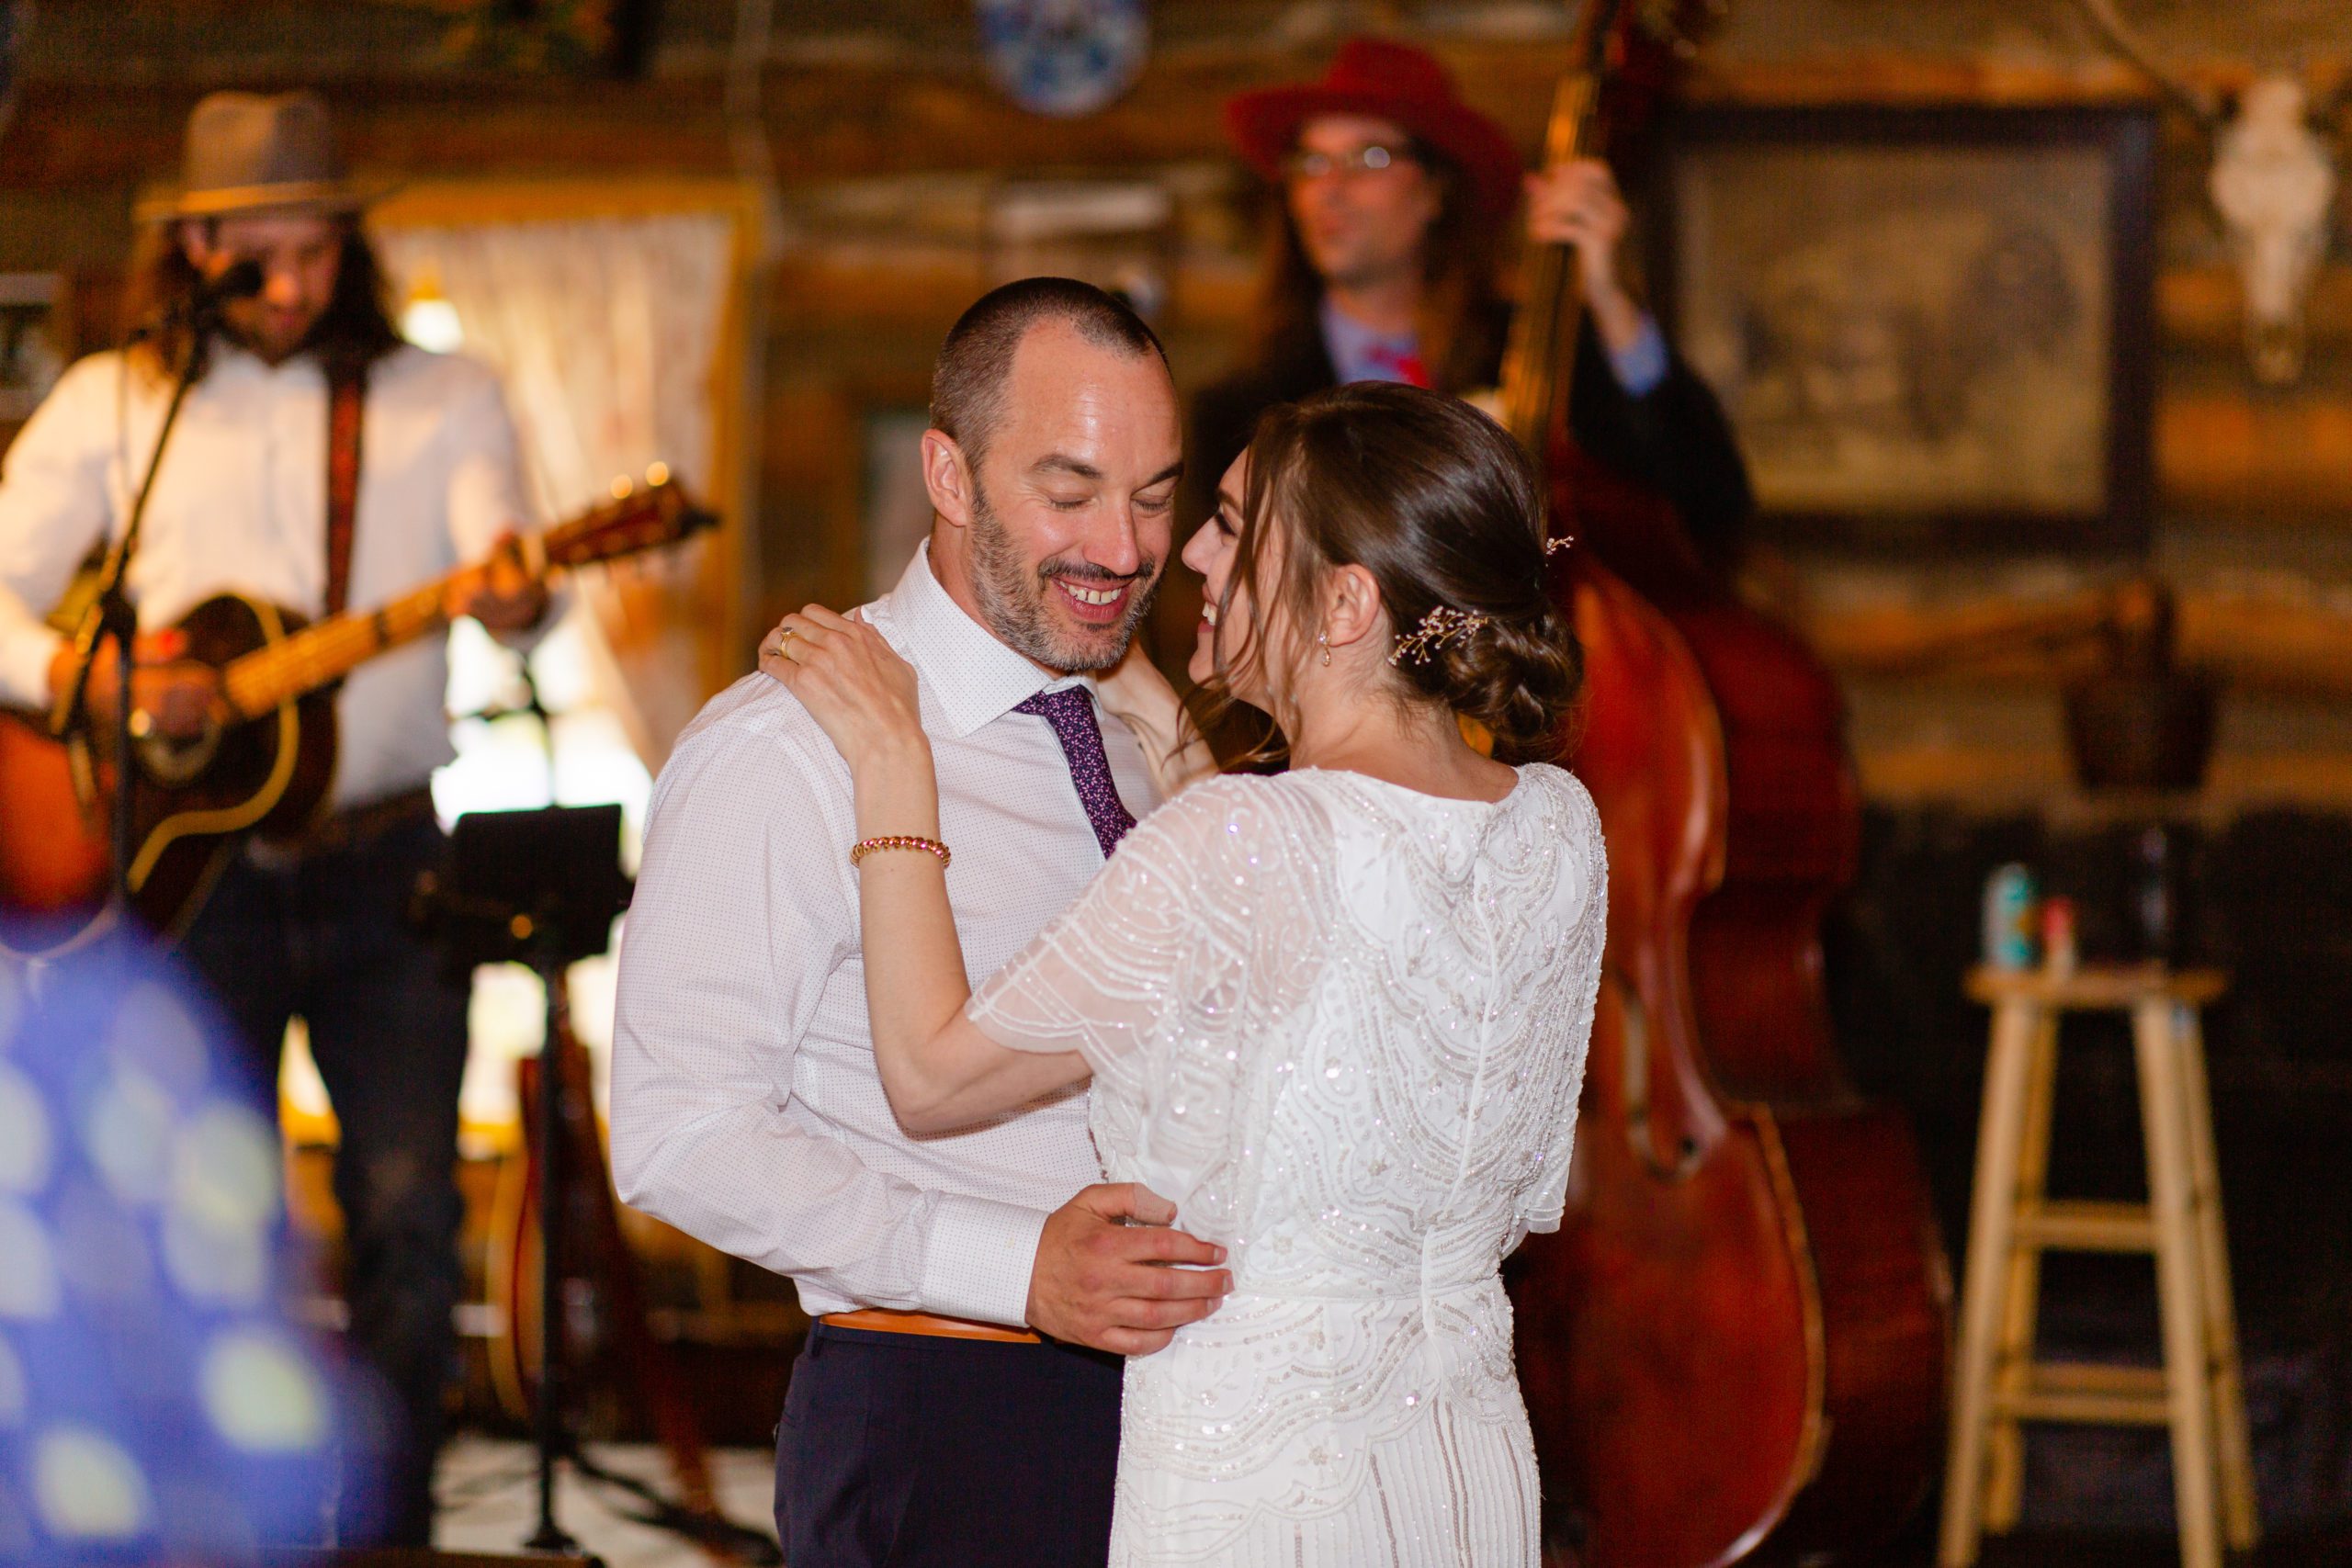 Bride and groom first dance at Gold Hill Inn with live band David Lawrence Spoonful